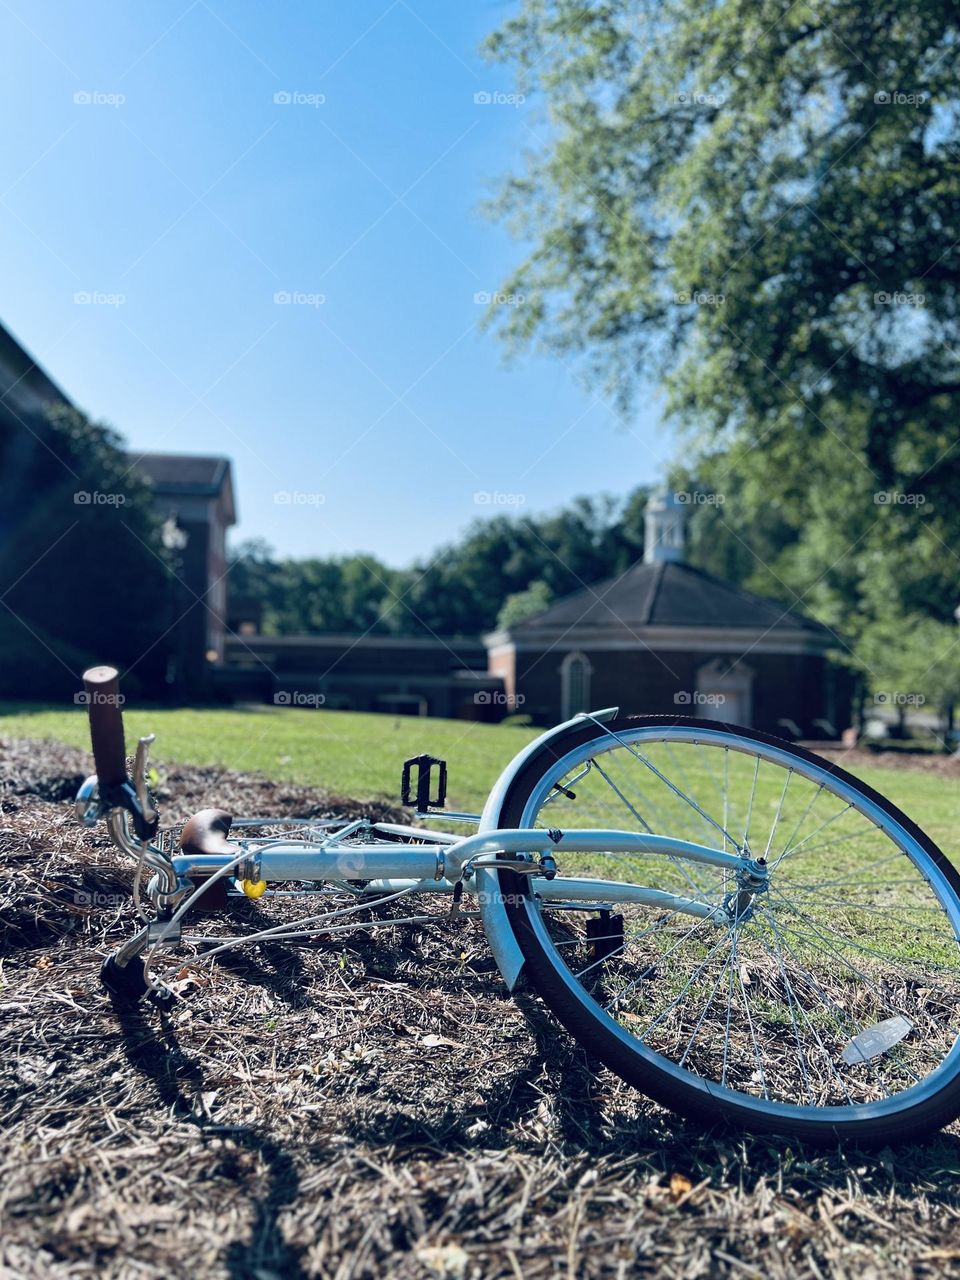 A blue cruiser style bicycle lying on its side in the foreground, with a grassy lawn, tree and brick church building in the background.